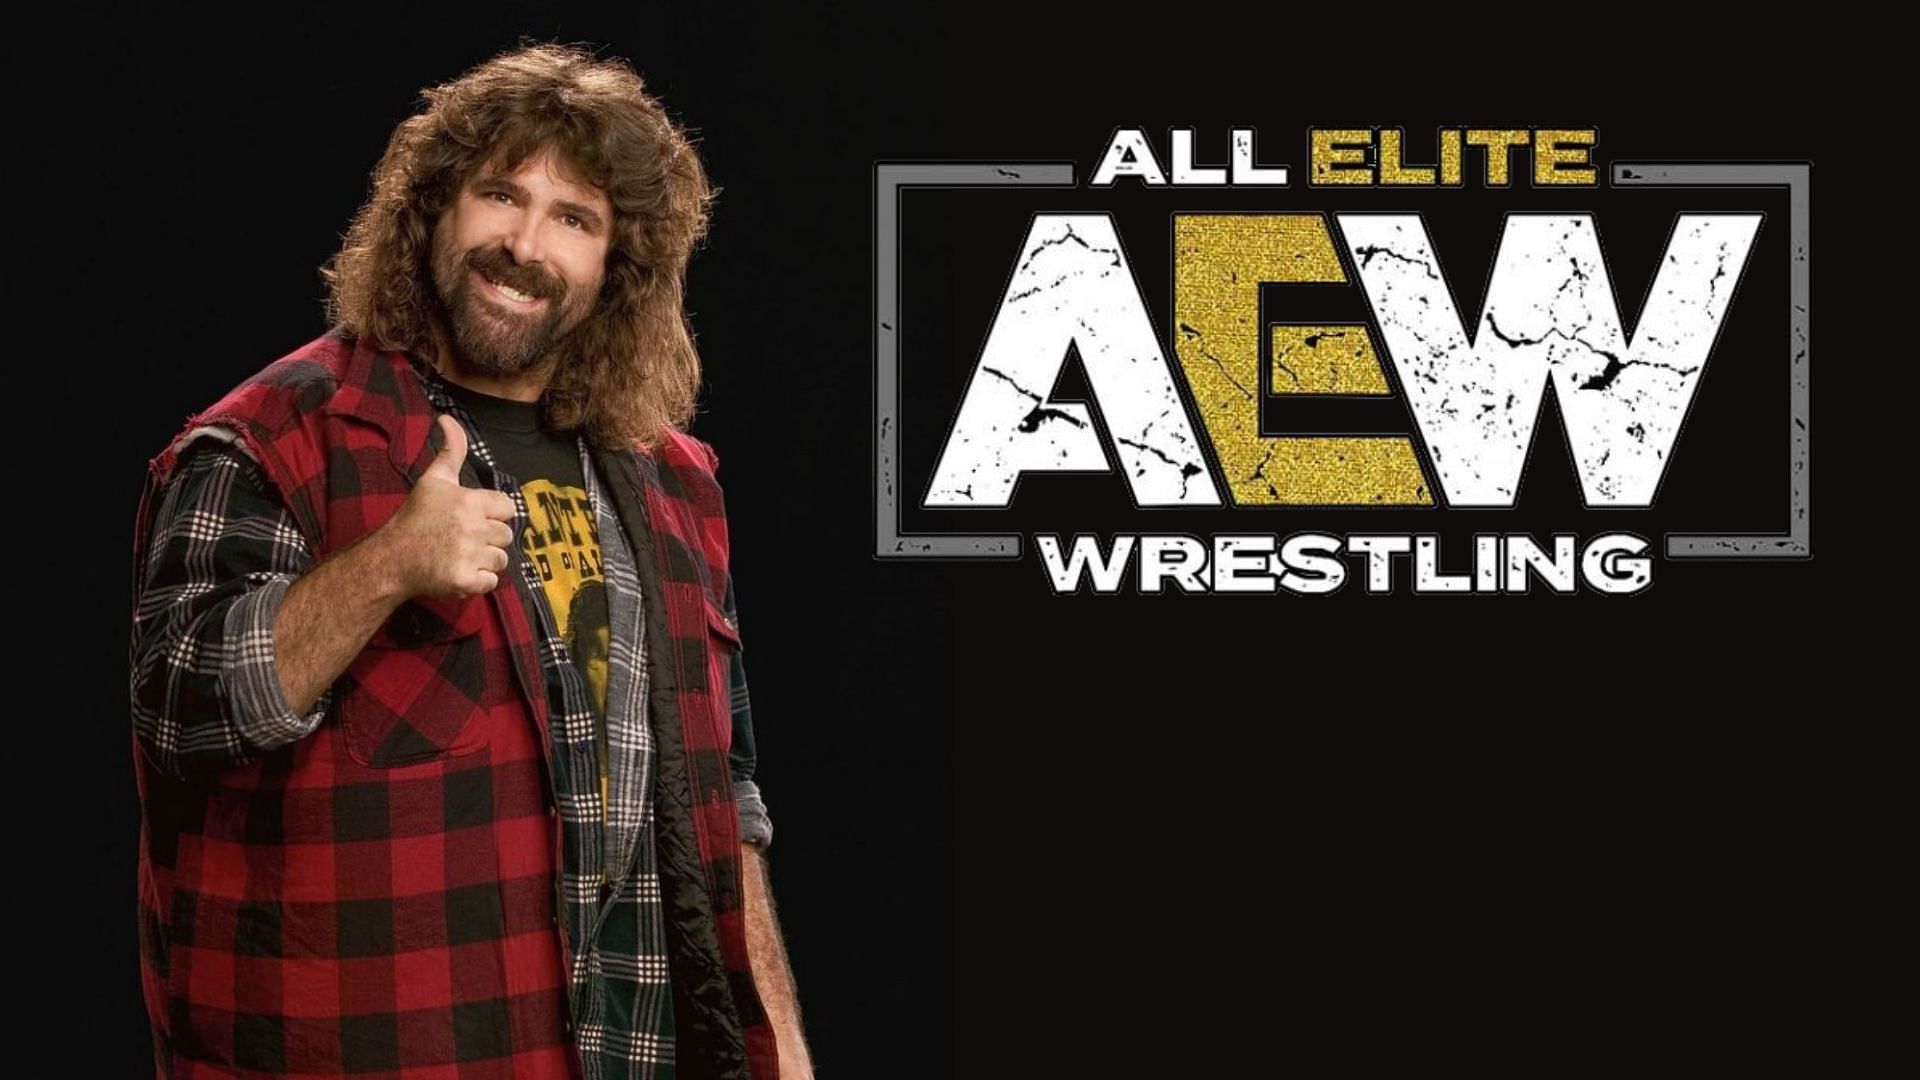 Mick Foley recently praised an AEW personality on Twitter!